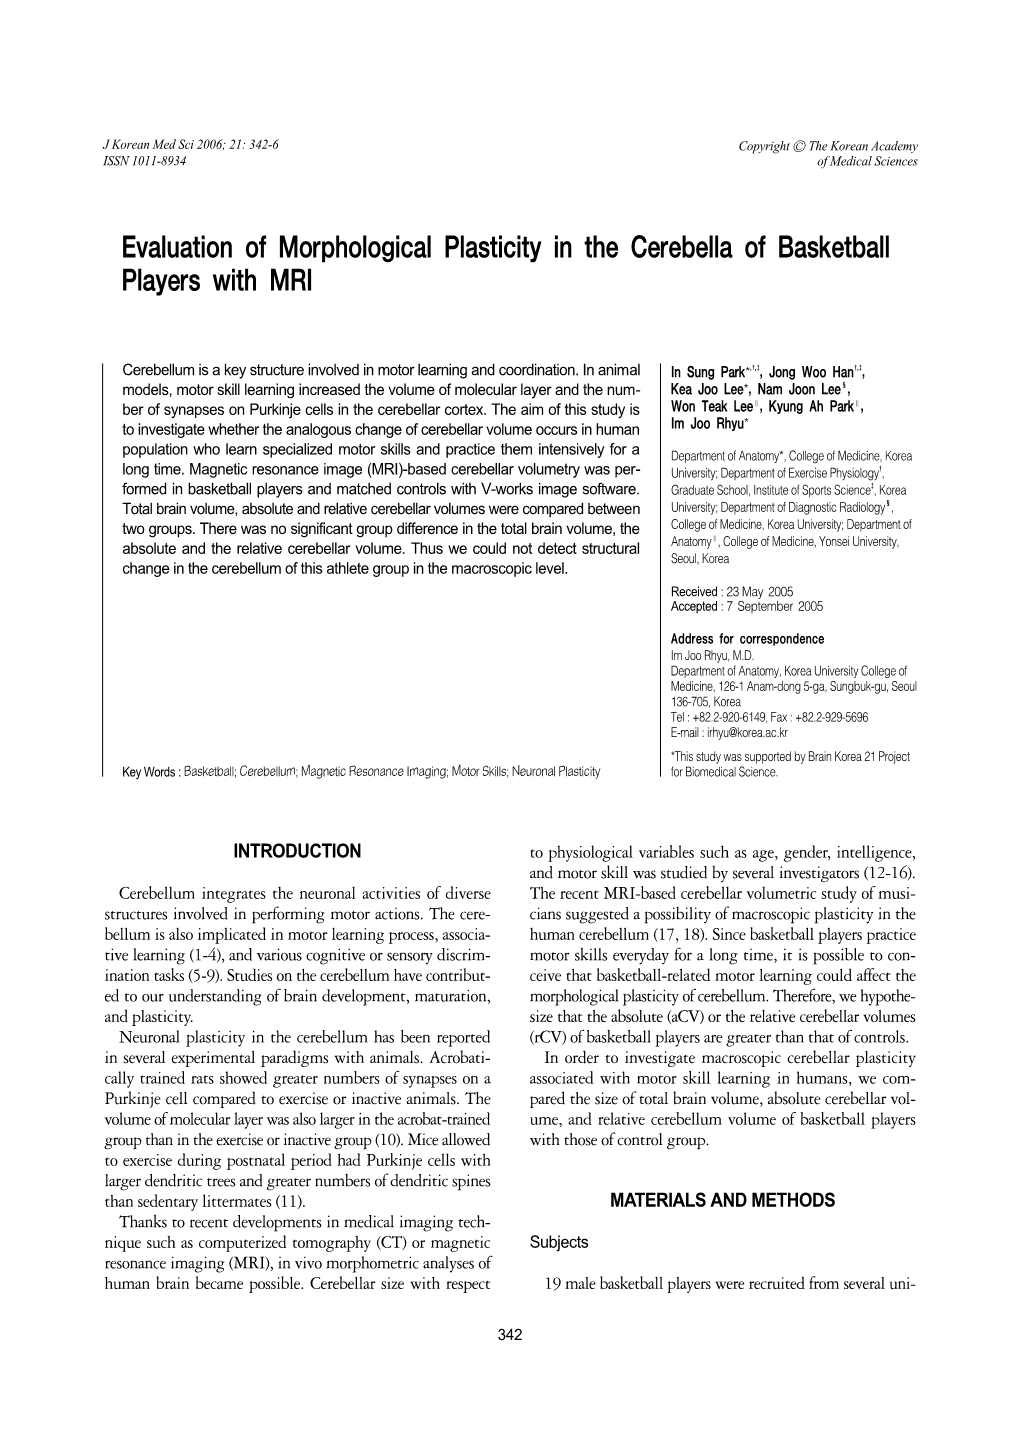 Evaluation of Morphological Plasticity in the Cerebella of Basketball Players with MRI